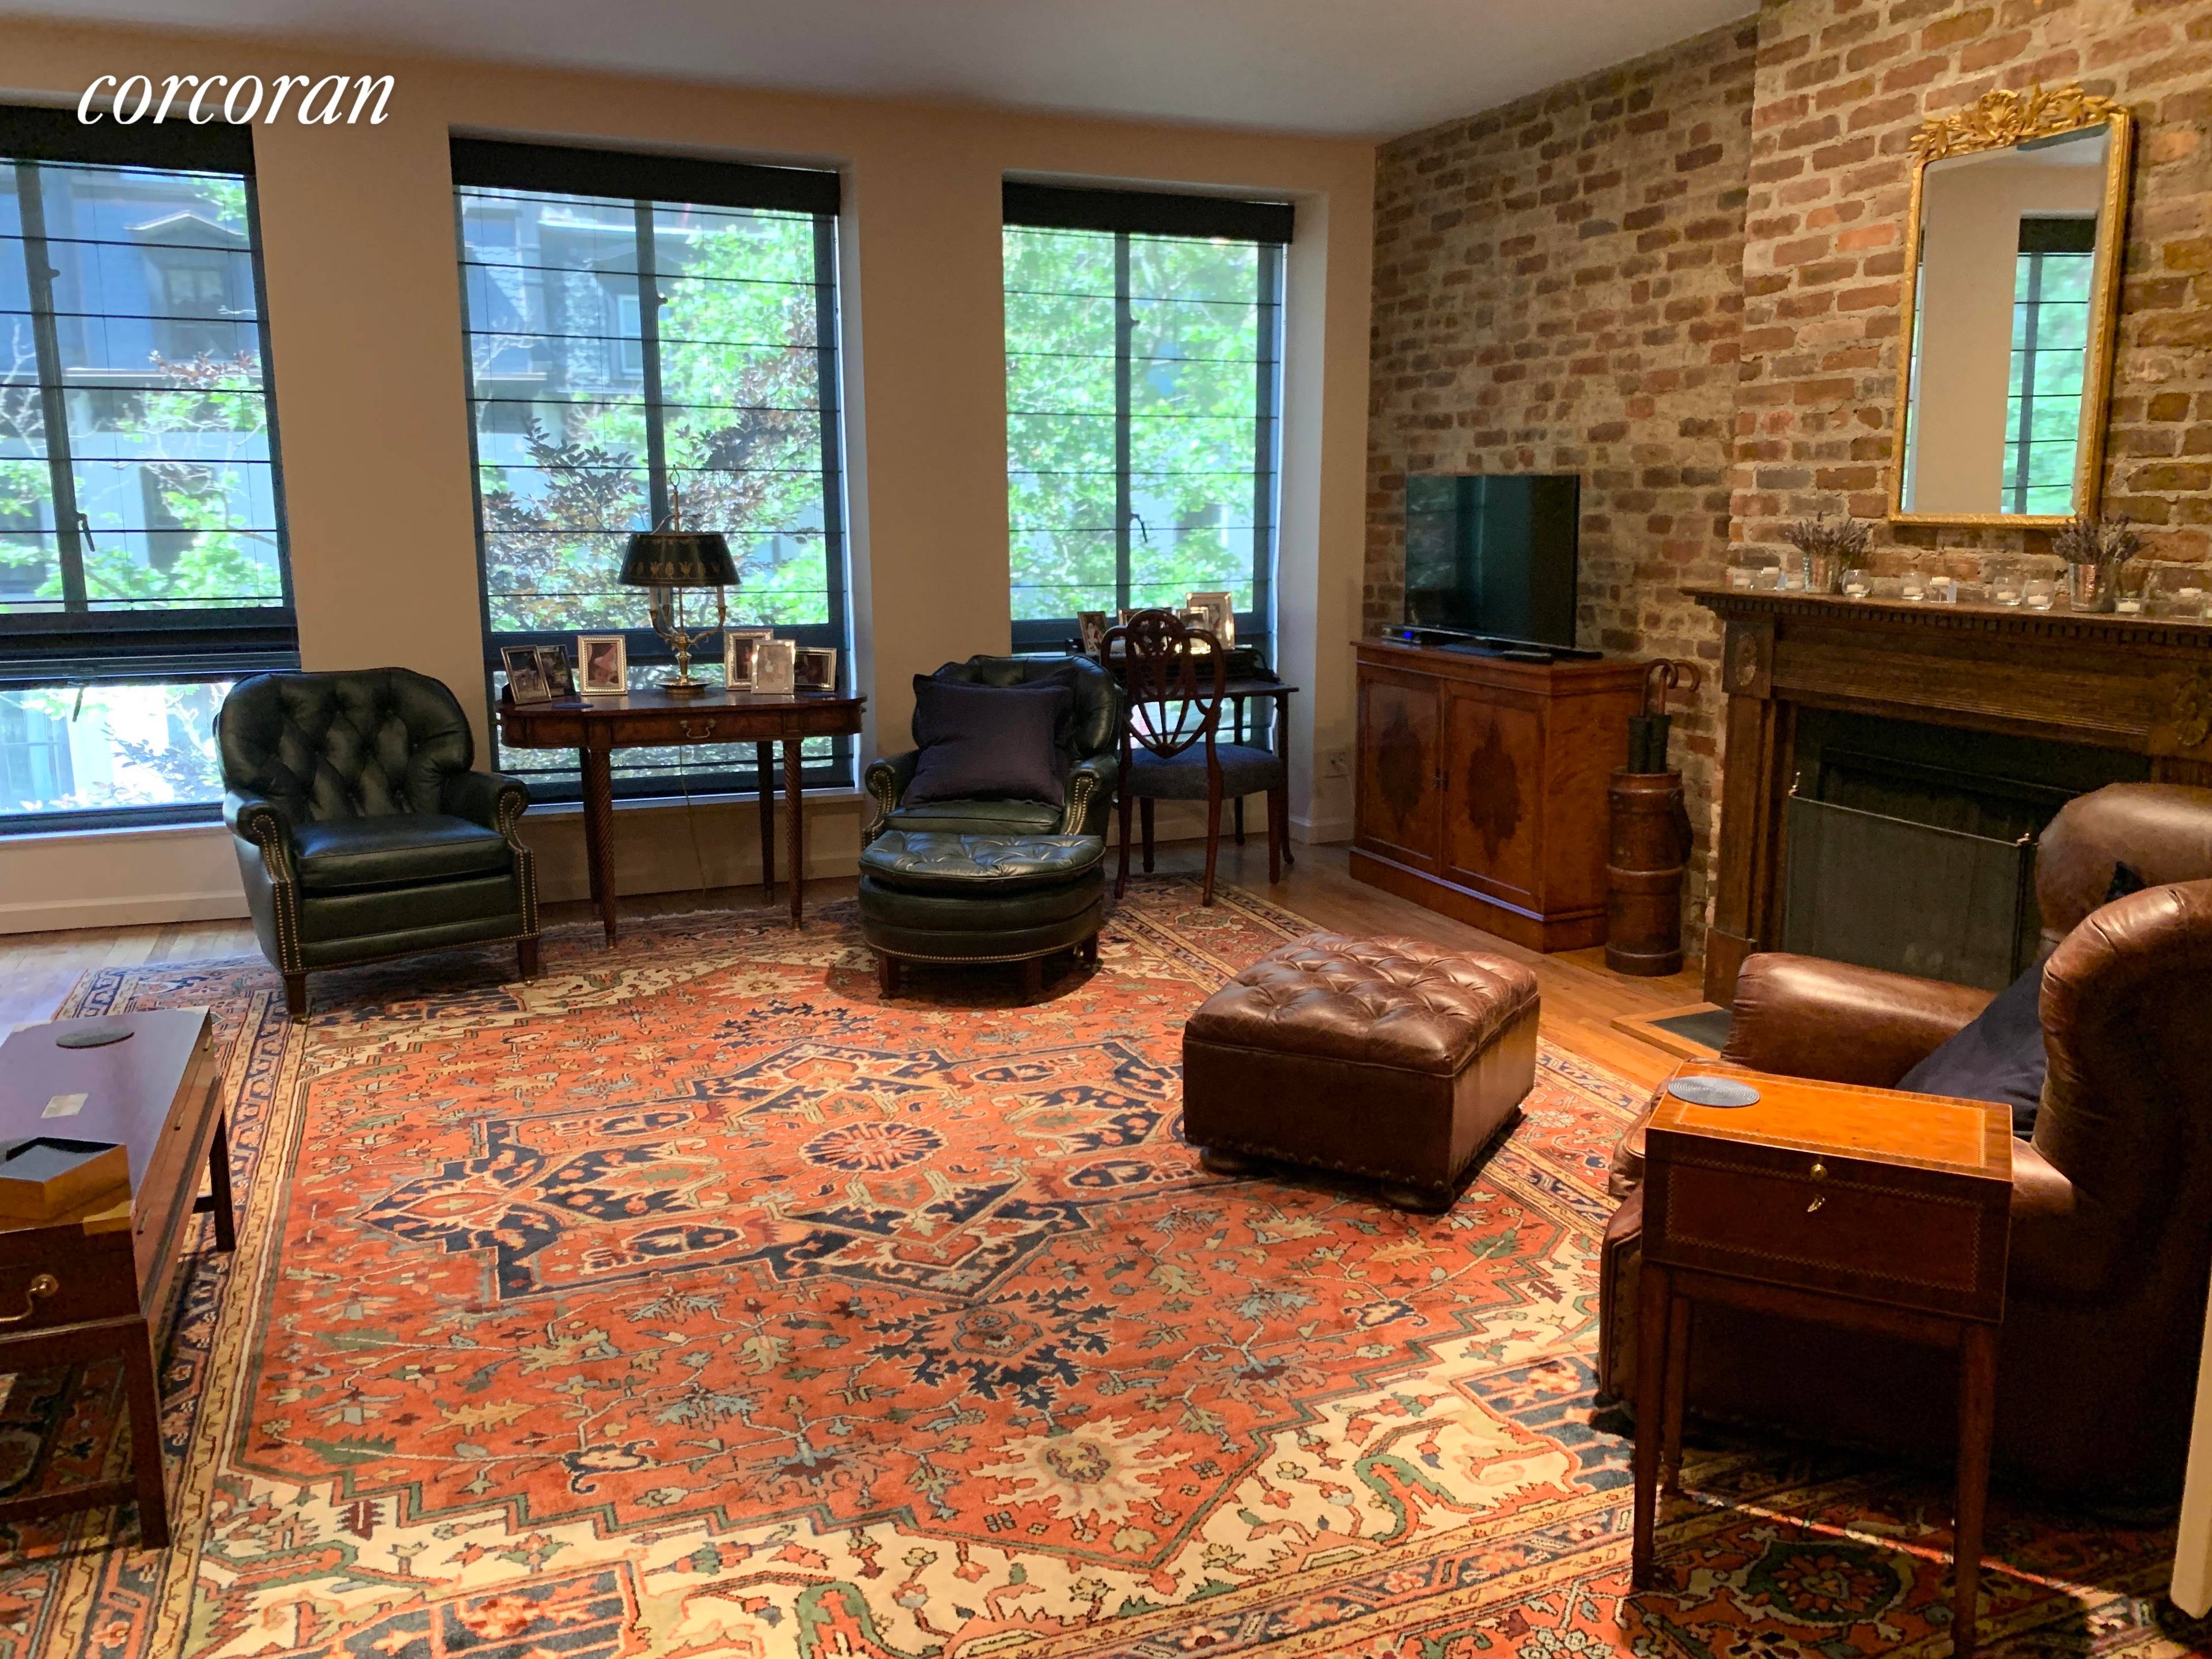 Feel at home in this beautiful 2 bedroom, 1 bathroom duplex in a pristine Beekman Townhouse.